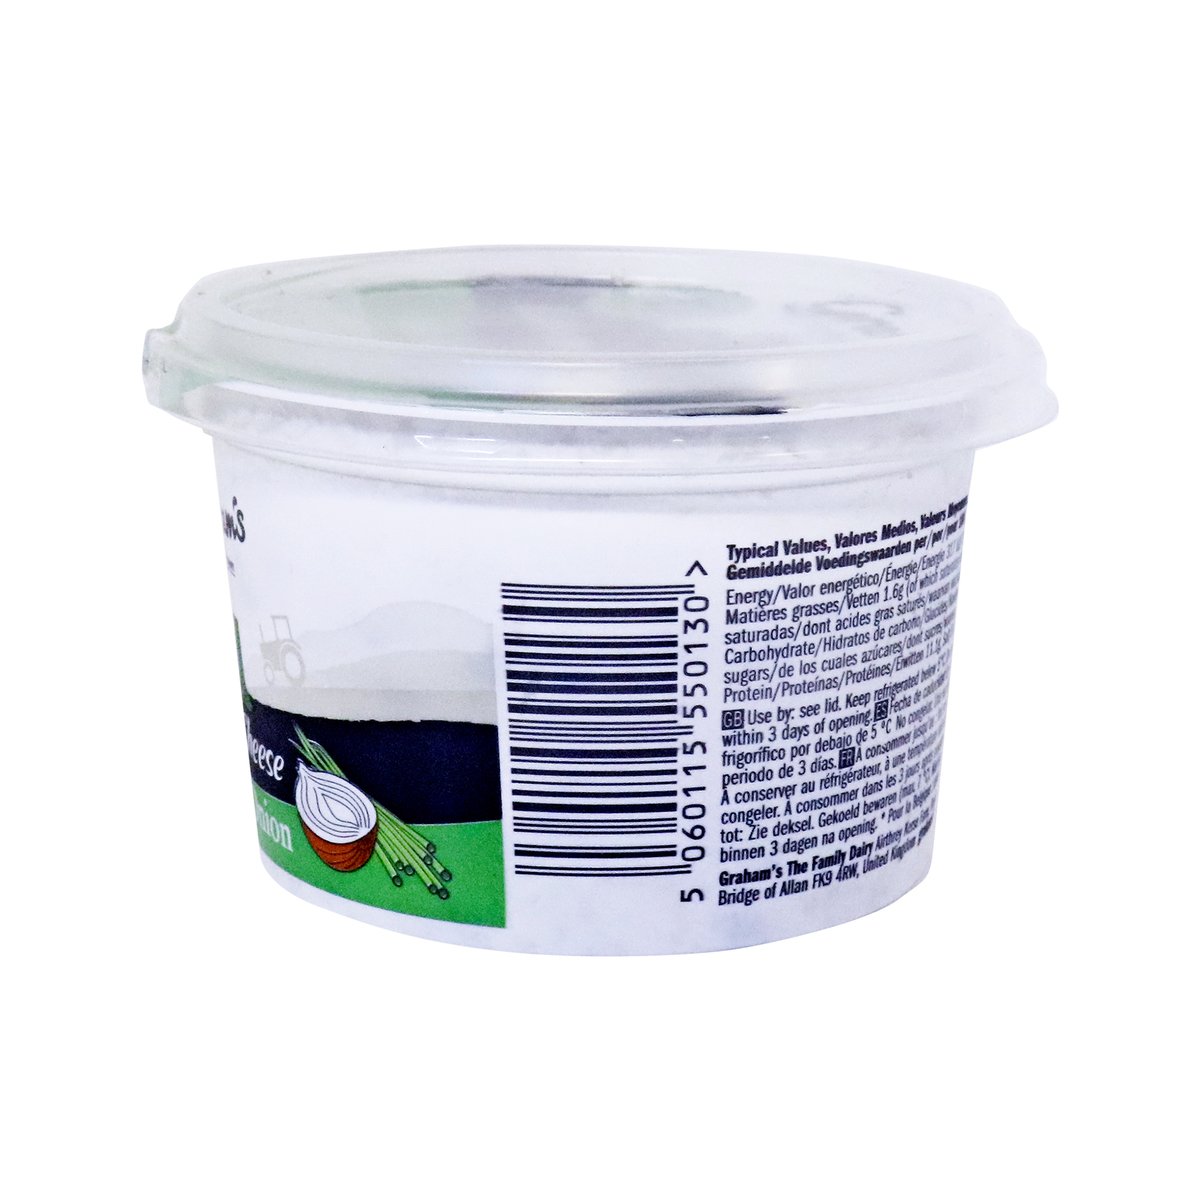 Graham's Low Fat Cottage Cheese Chive & Onion 227g